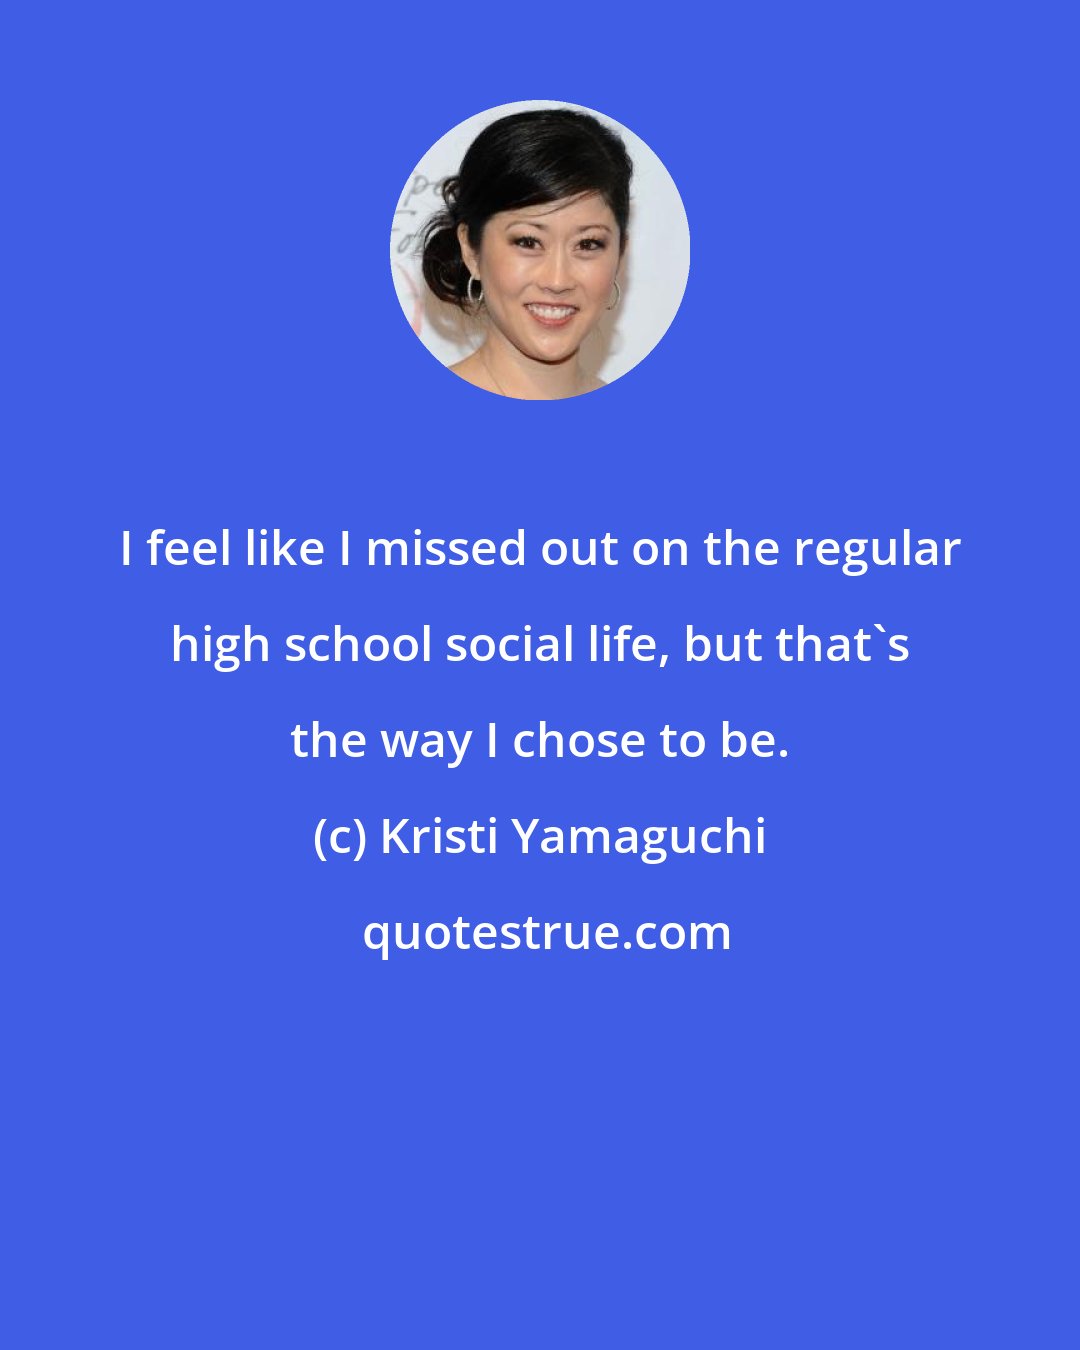 Kristi Yamaguchi: I feel like I missed out on the regular high school social life, but that's the way I chose to be.